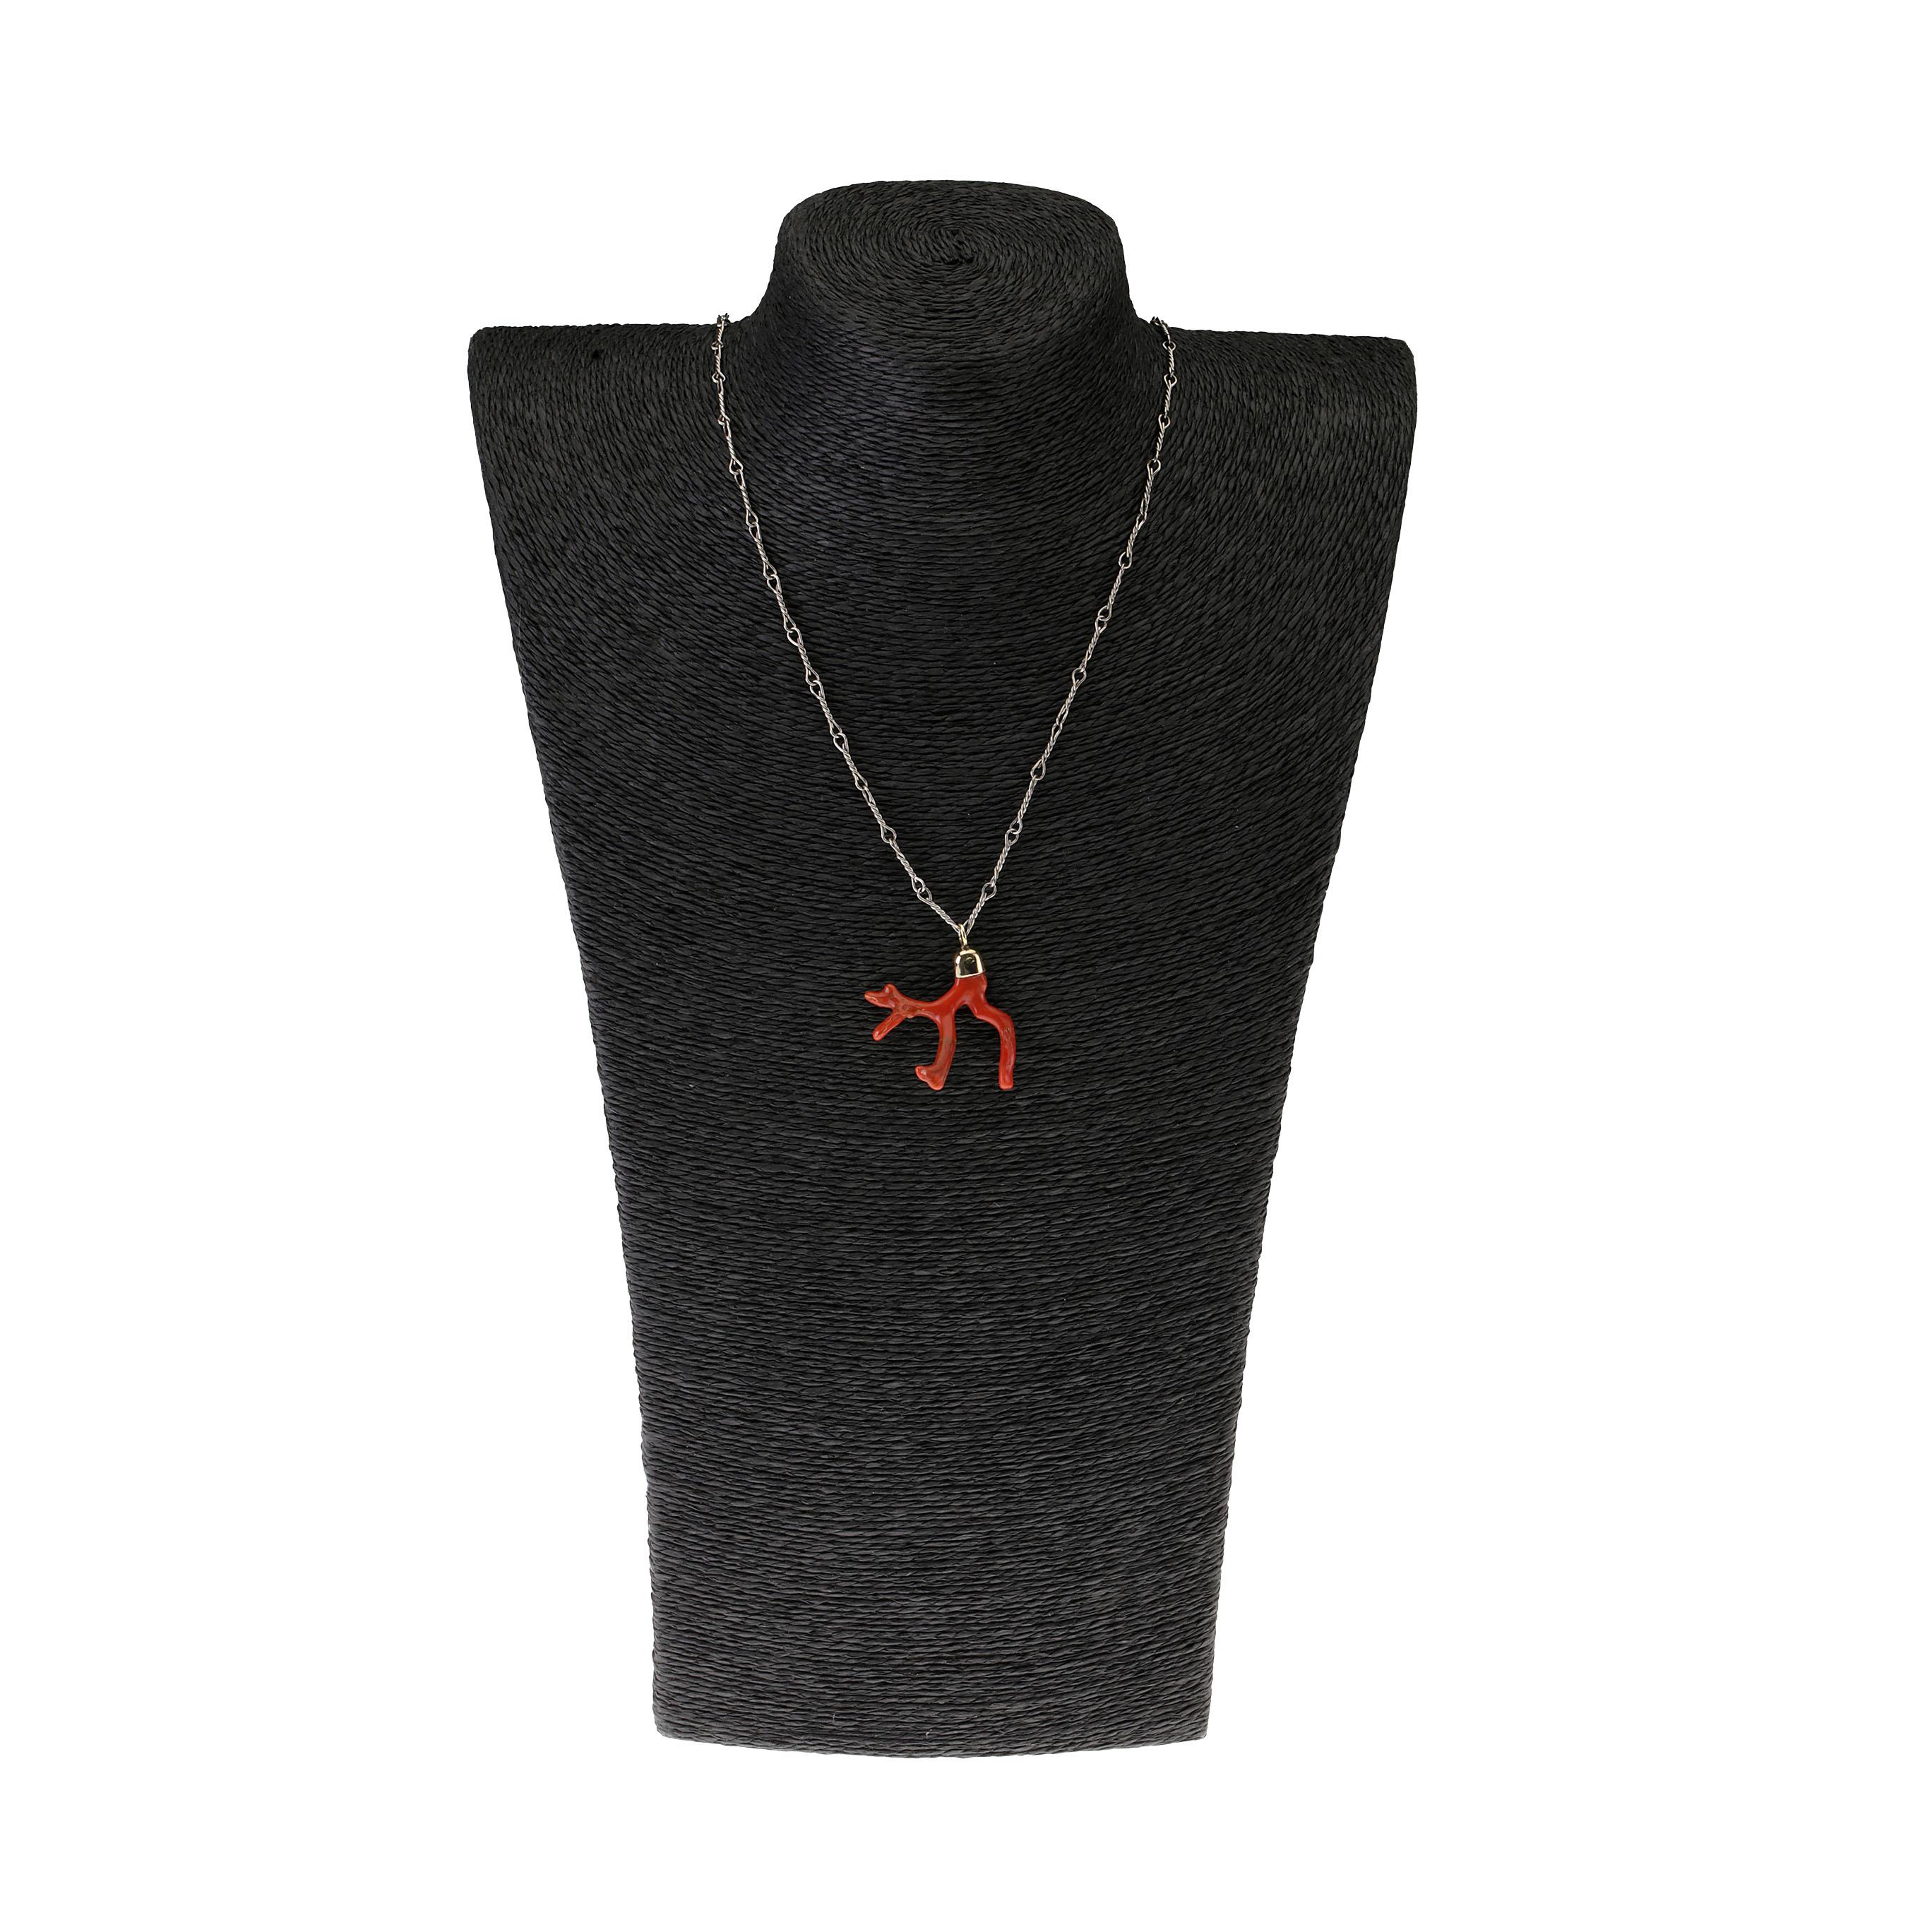 Very nice red Italian natural coral branch, gold 18k gr 3. It comes with a silk color string very refined.
All Giulia Colussi jewelry is new and has never been previously owned or worn. Each item will arrive at your door beautifully gift wrapped in